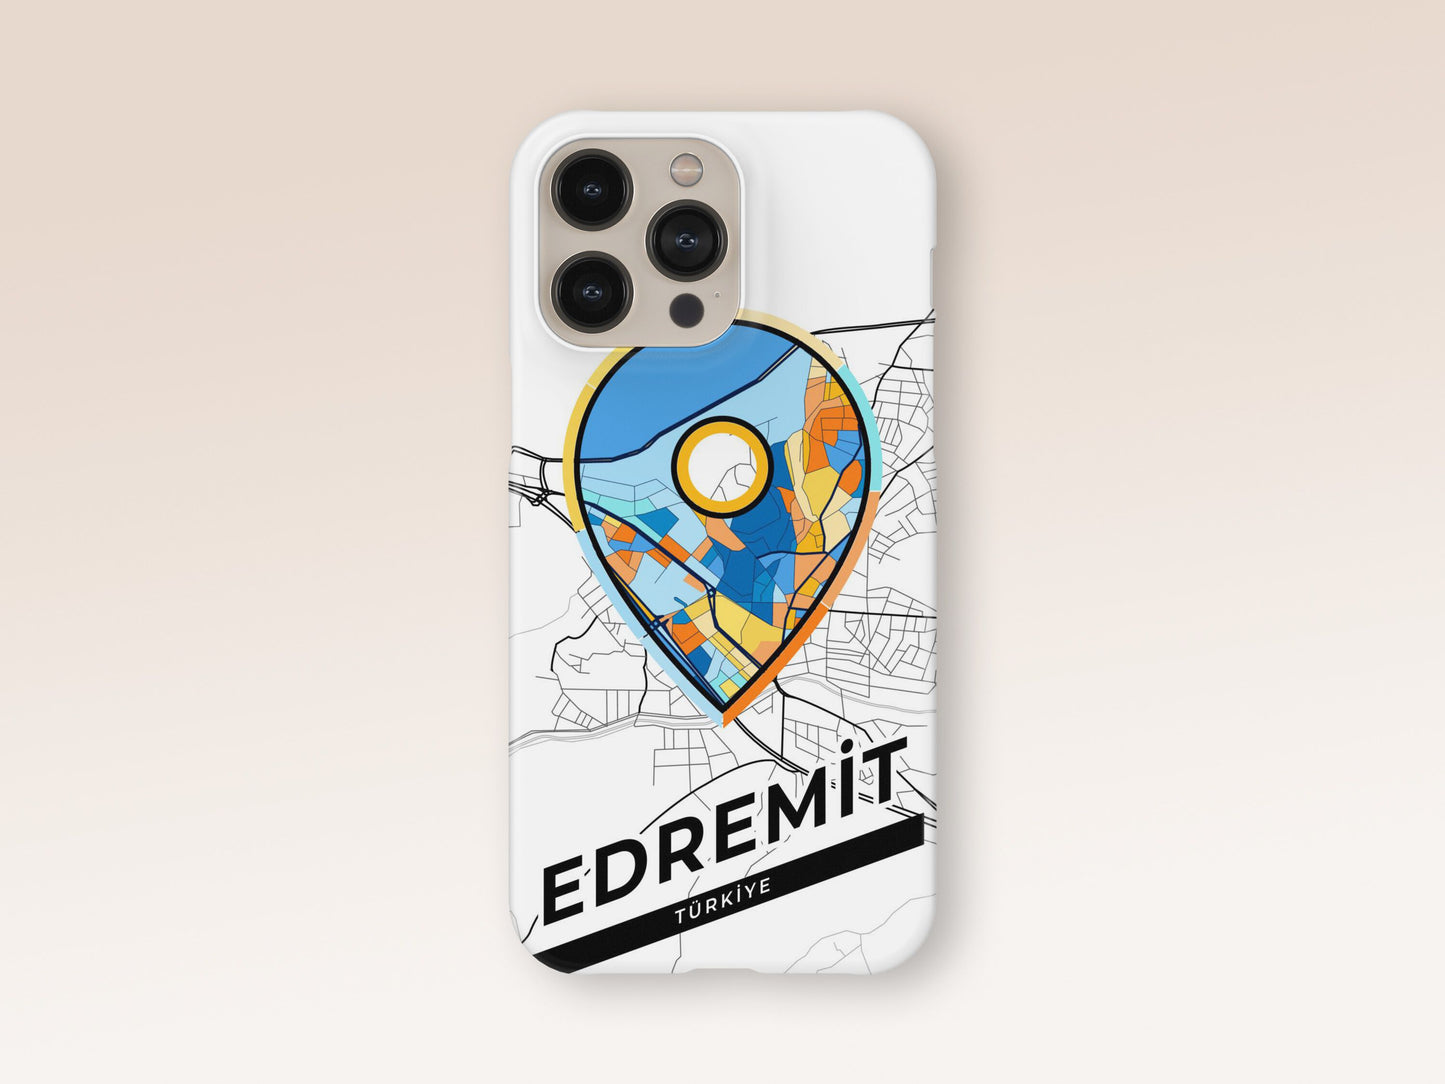 Edremit Turkey slim phone case with colorful icon. Birthday, wedding or housewarming gift. Couple match cases. 1